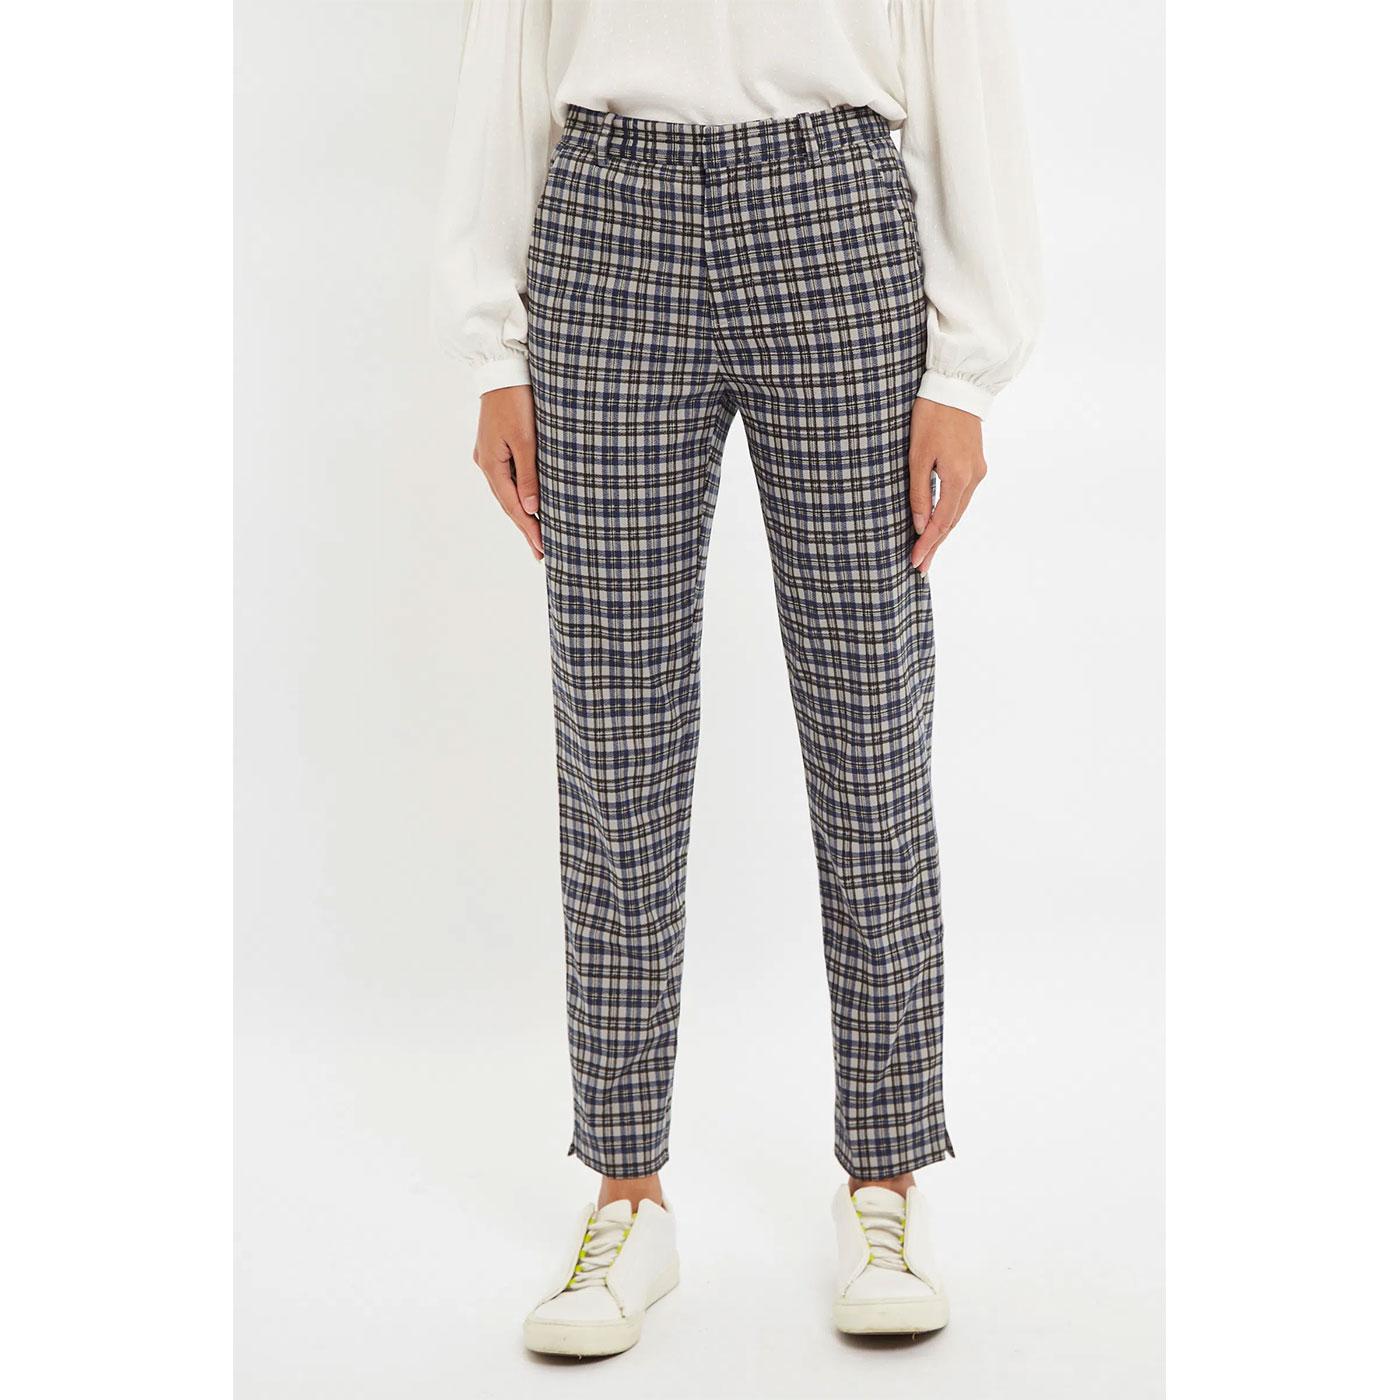 Joele LOUCHE Golf Check Ankle Length Trousers NAVY